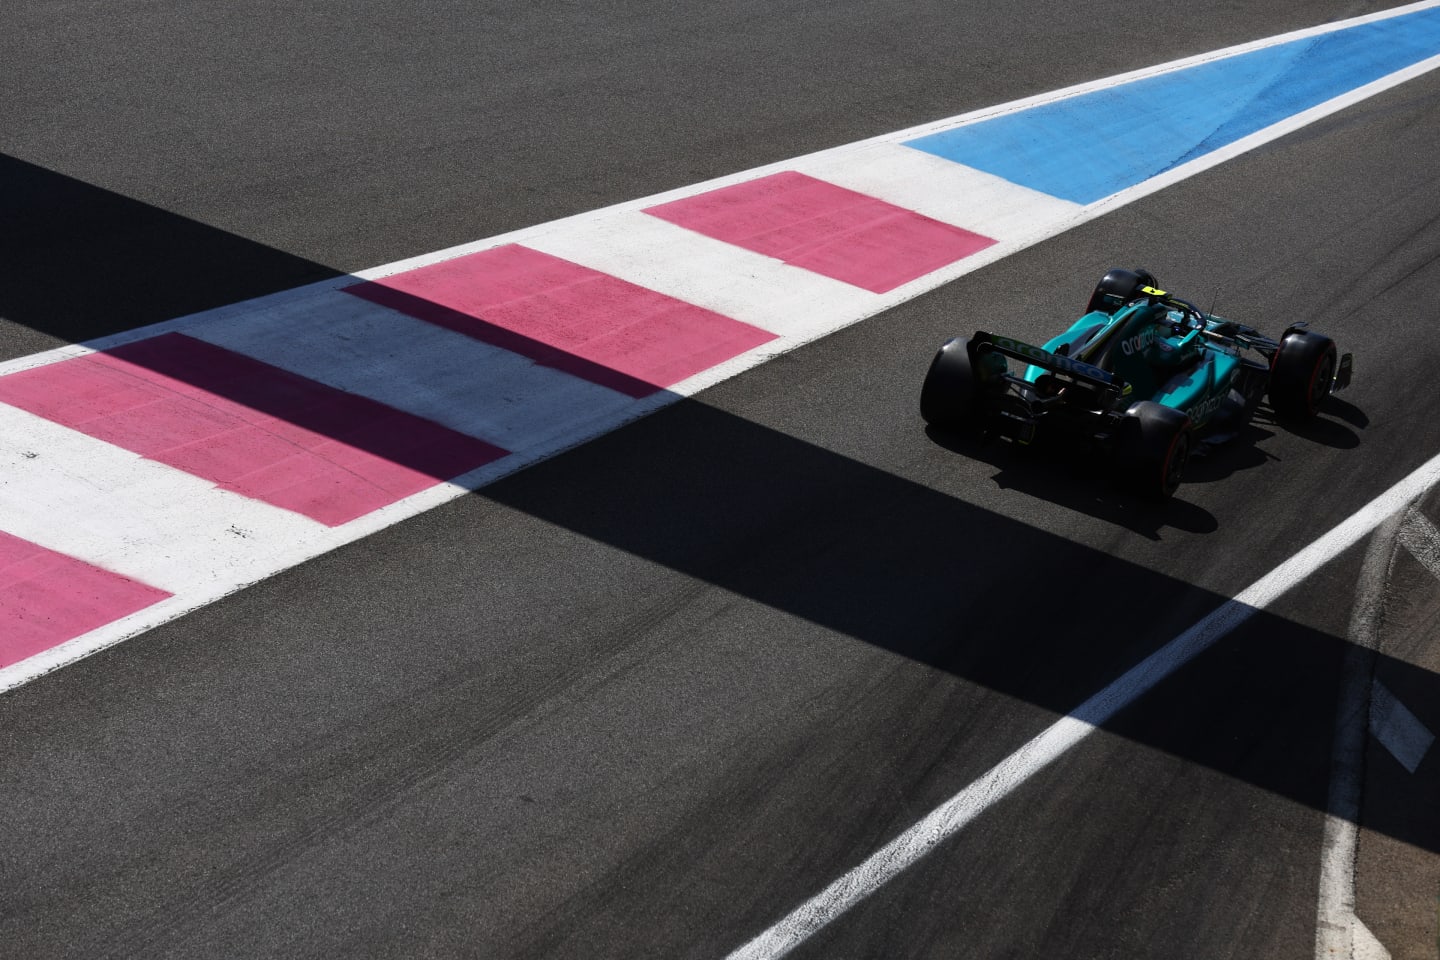 LE CASTELLET, FRANCE - JULY 23: Sebastian Vettel of Germany driving the (5) Aston Martin AMR22 Mercedes on track during qualifying ahead of the F1 Grand Prix of France at Circuit Paul Ricard on July 23, 2022 in Le Castellet, France. (Photo by Clive Rose/Getty Images)